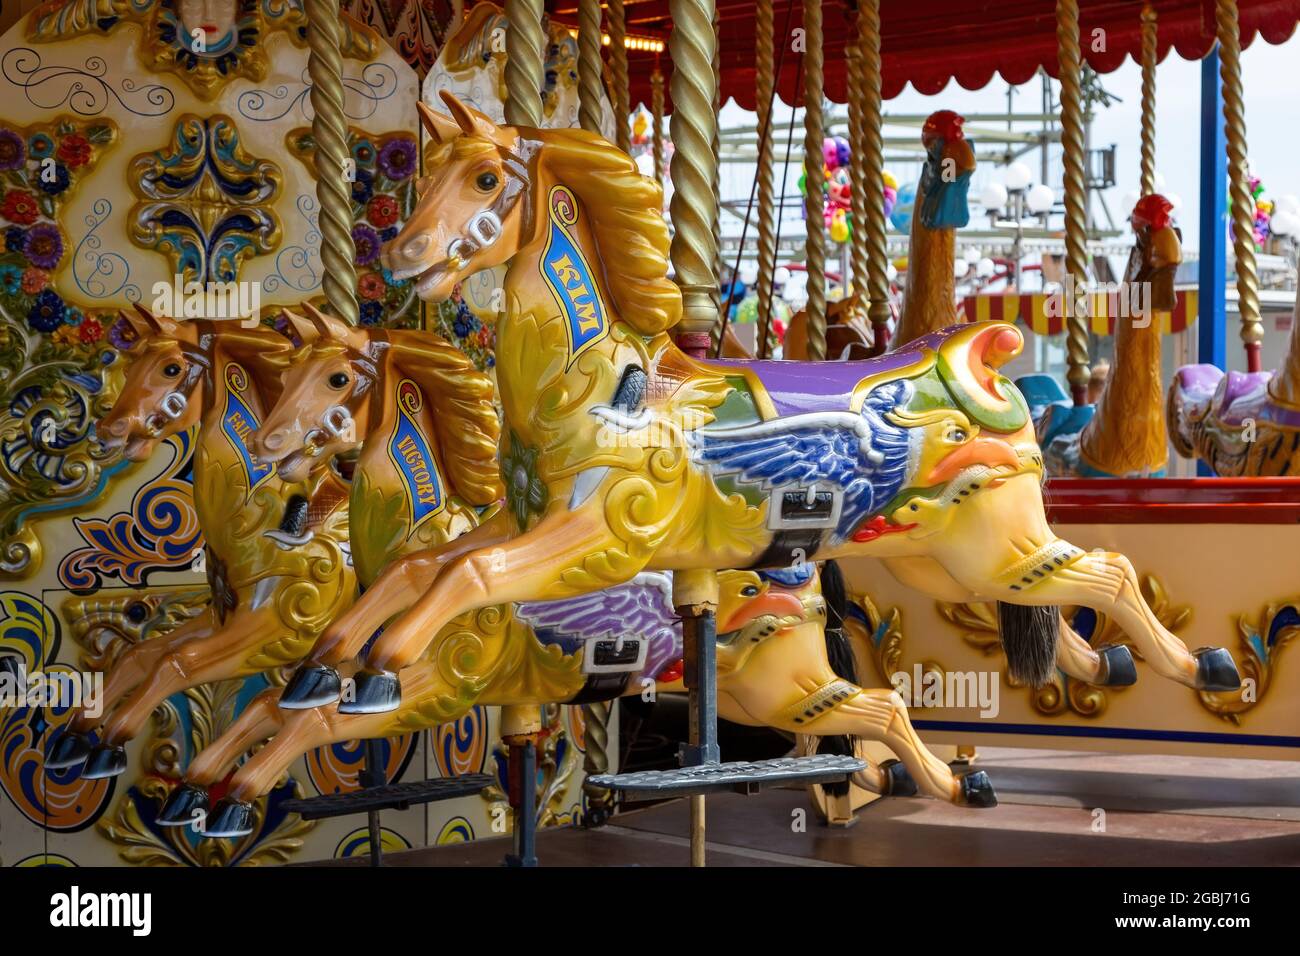 08-04-2021 Portsmouth, Hampshire, UK Traditional wooden carousel horses at a fairground Stock Photo